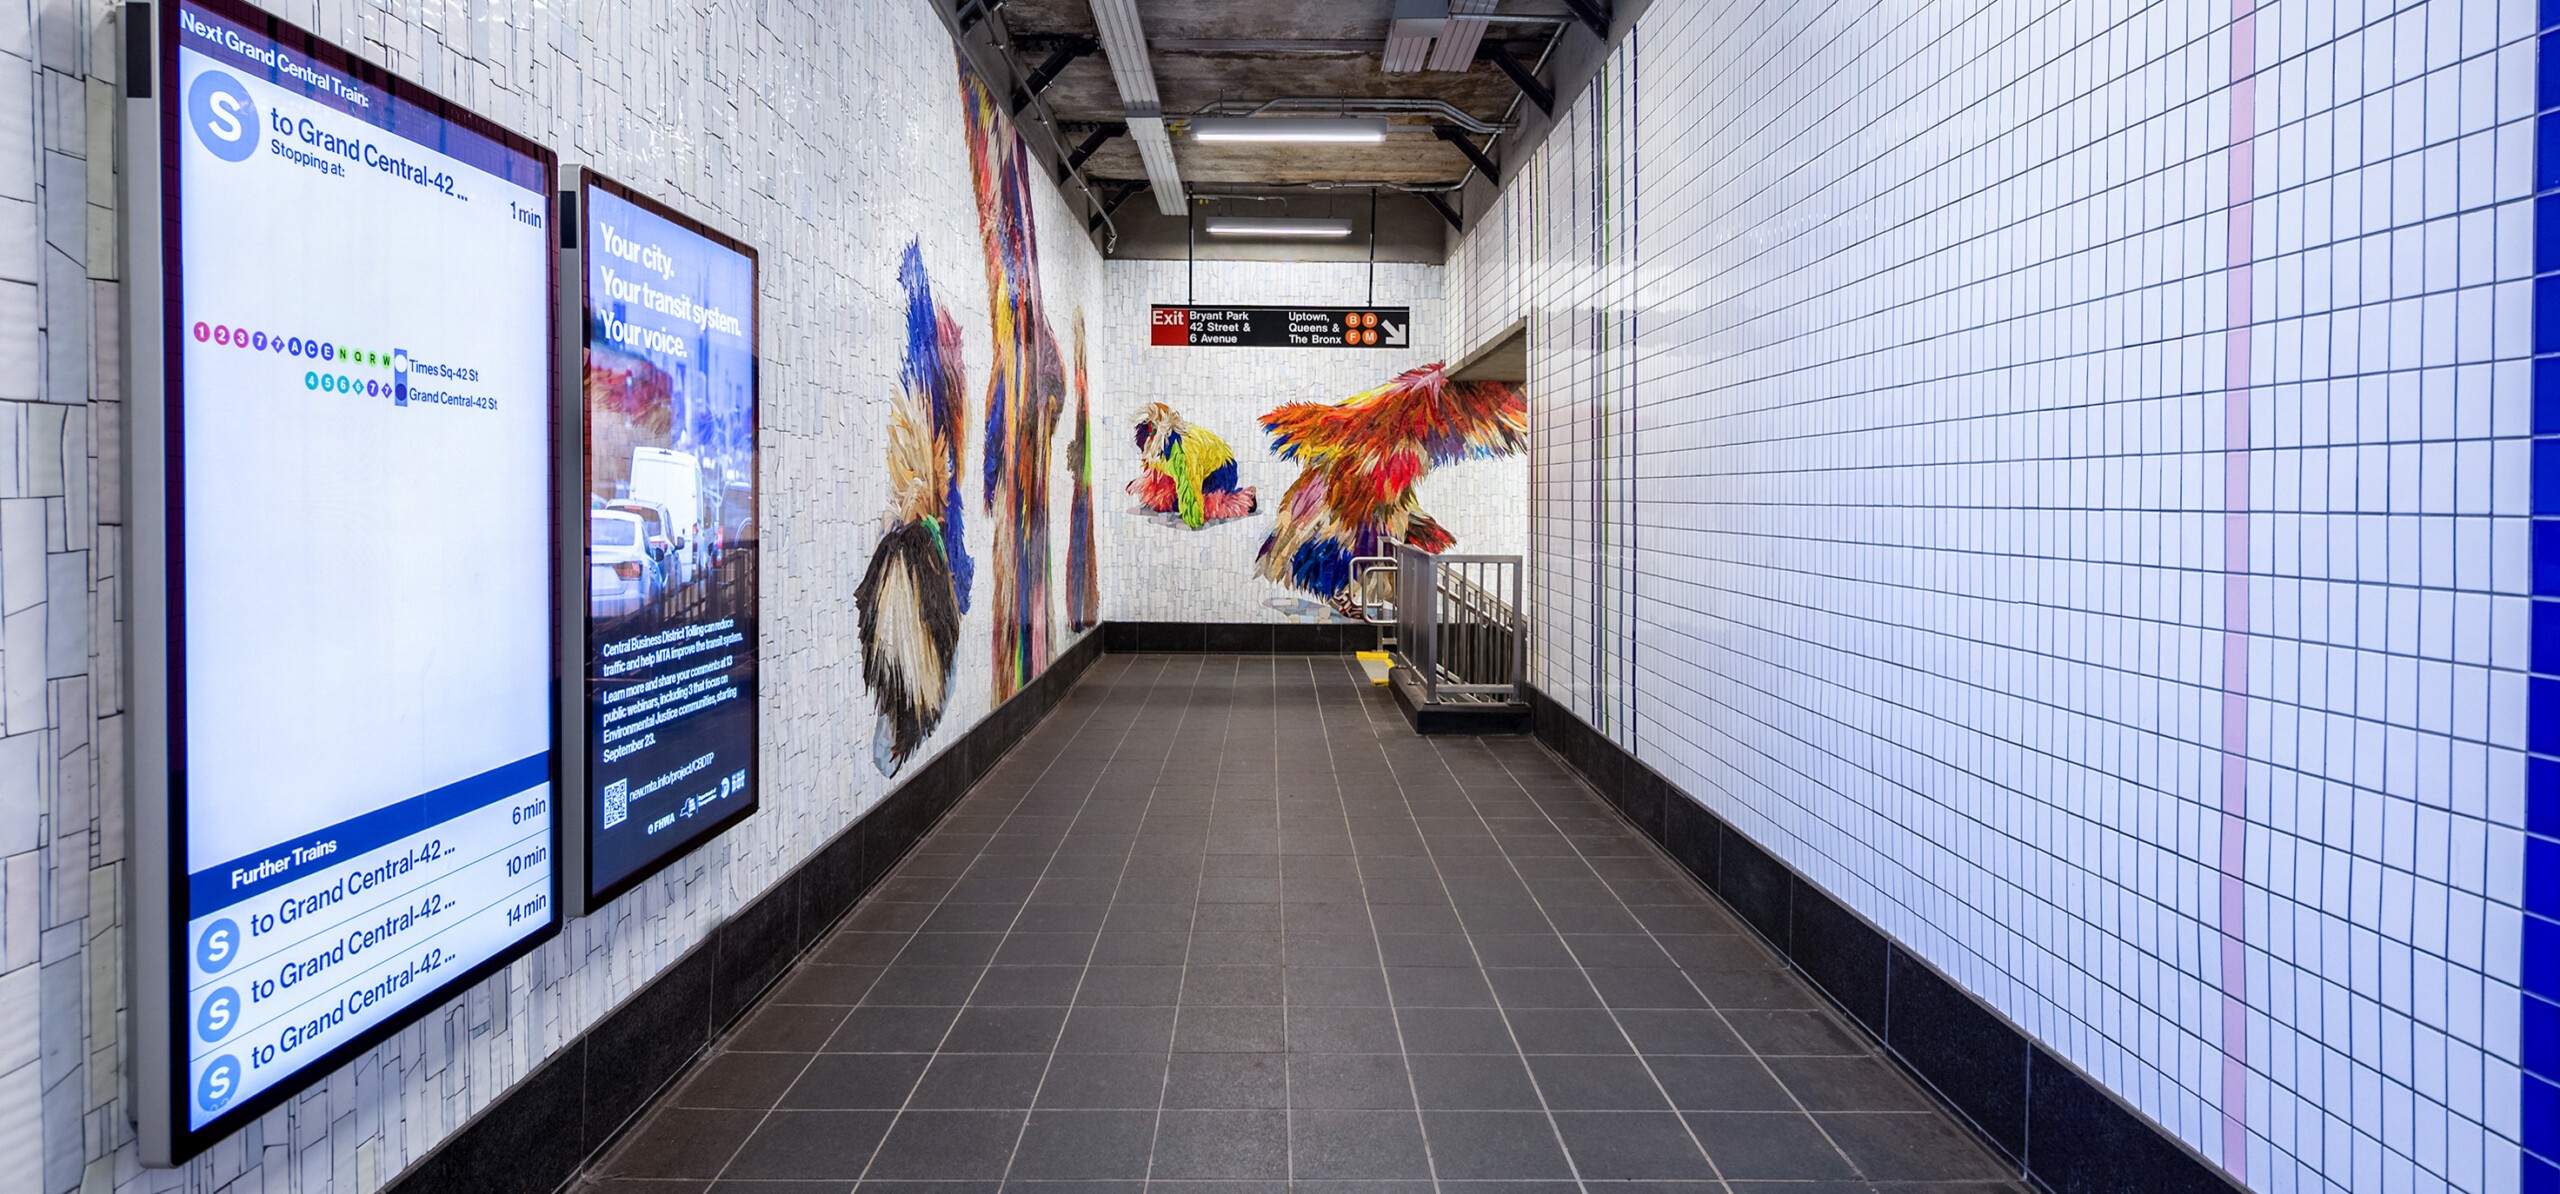 42nd Street Connector with mosaic tiles and screens